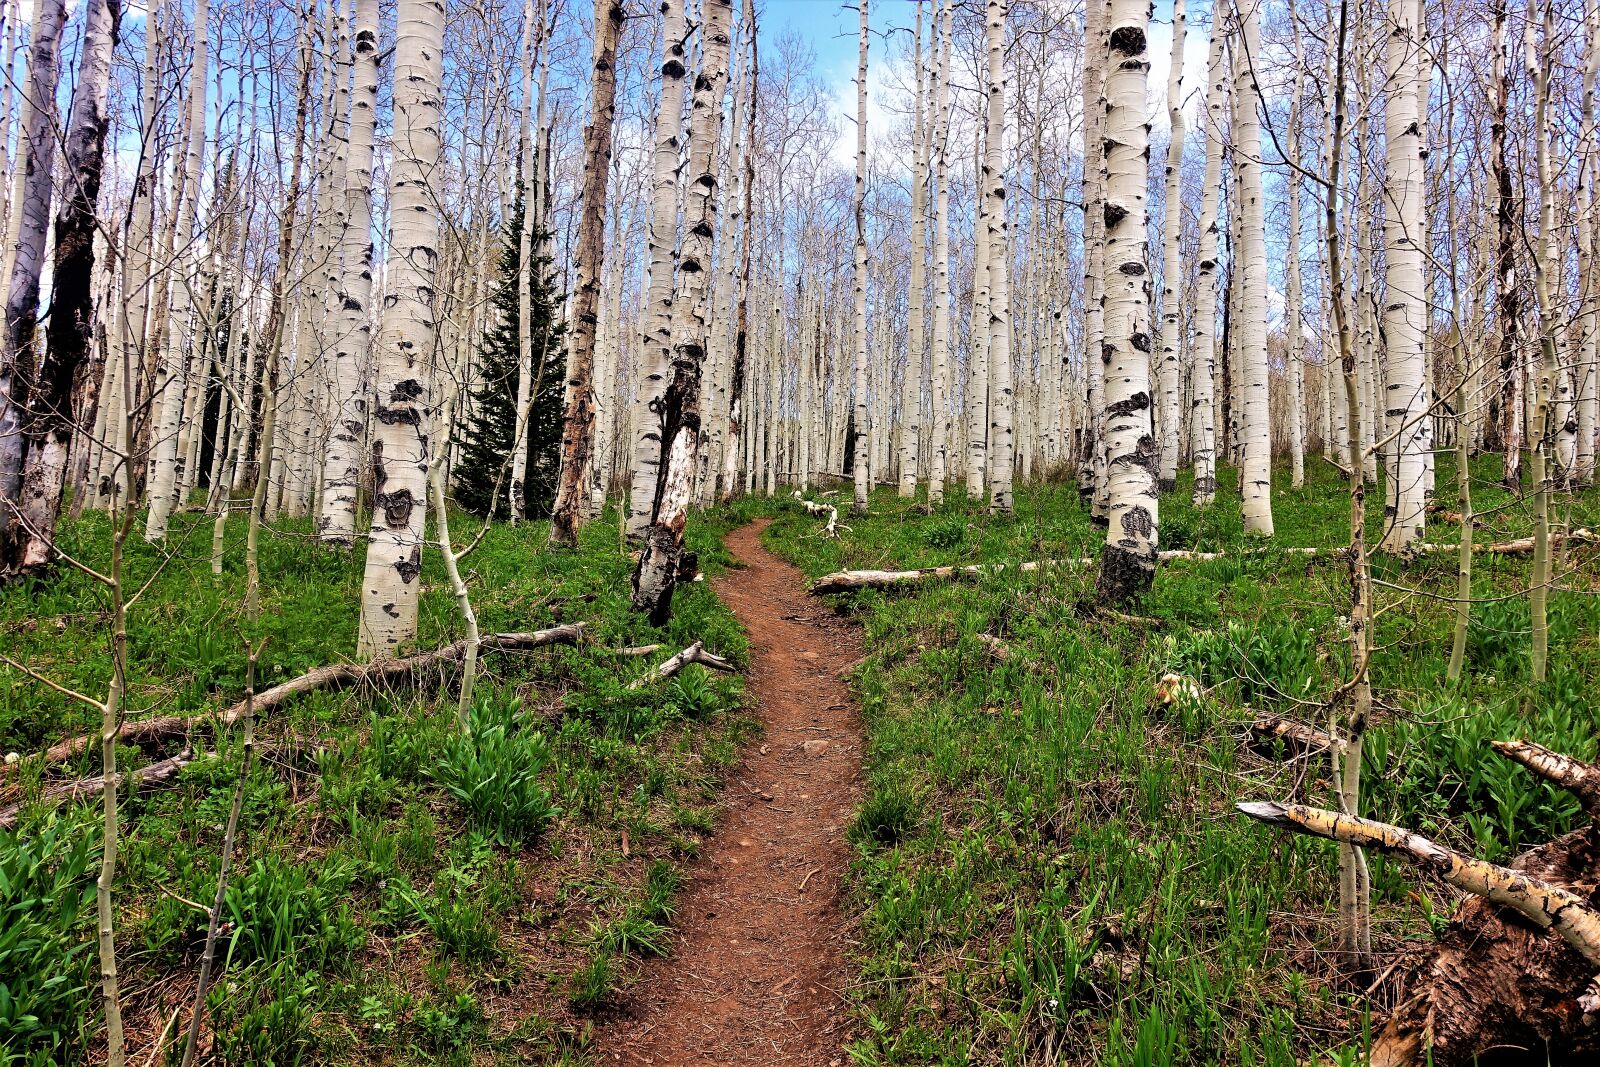 Sony Cyber-shot DSC-RX100 III sample photo. Aspen trees, forest, path photography